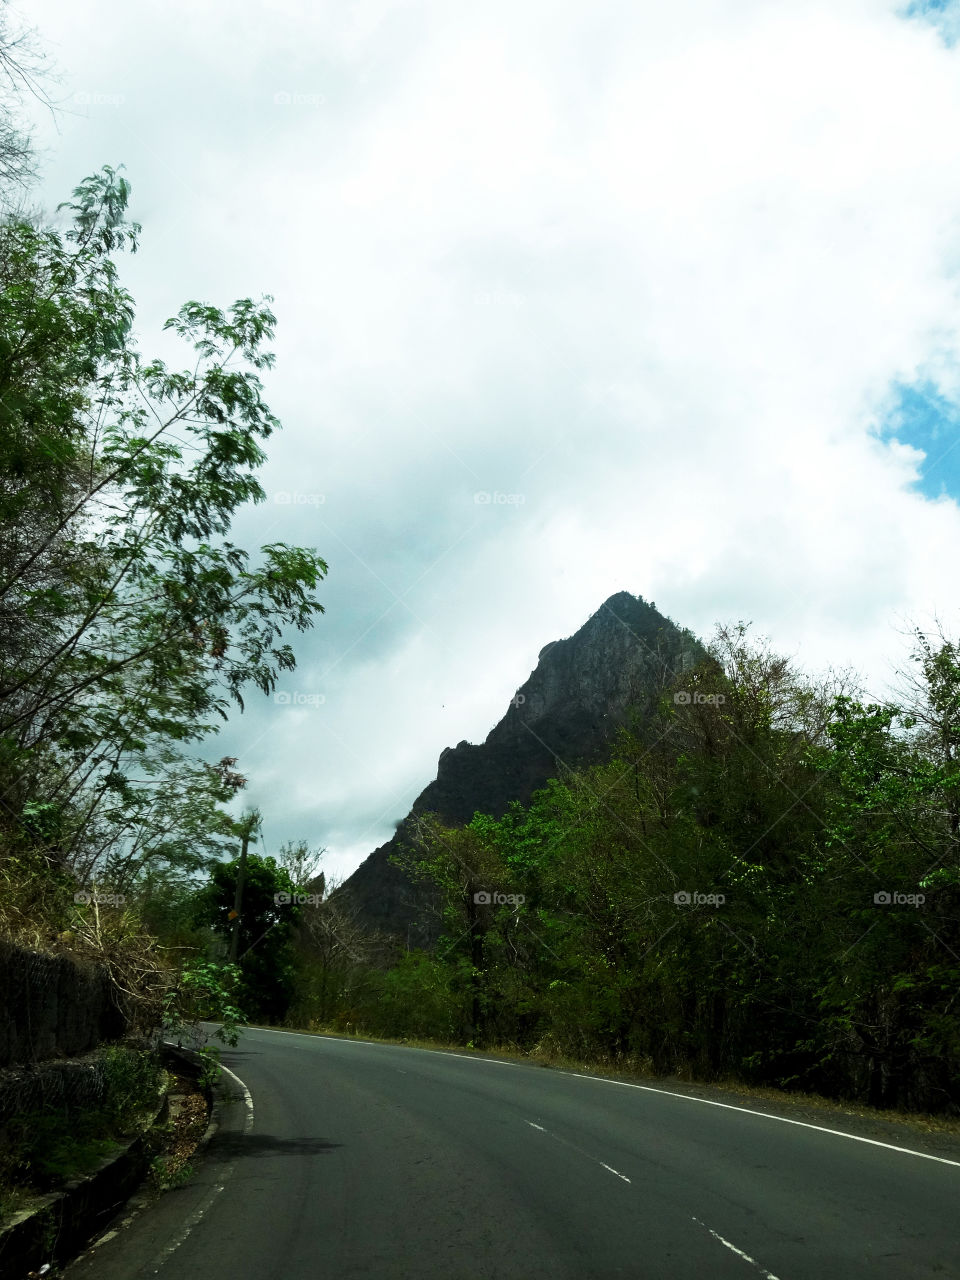 Piton . One of the Pitons seen while driving in St. Lucia